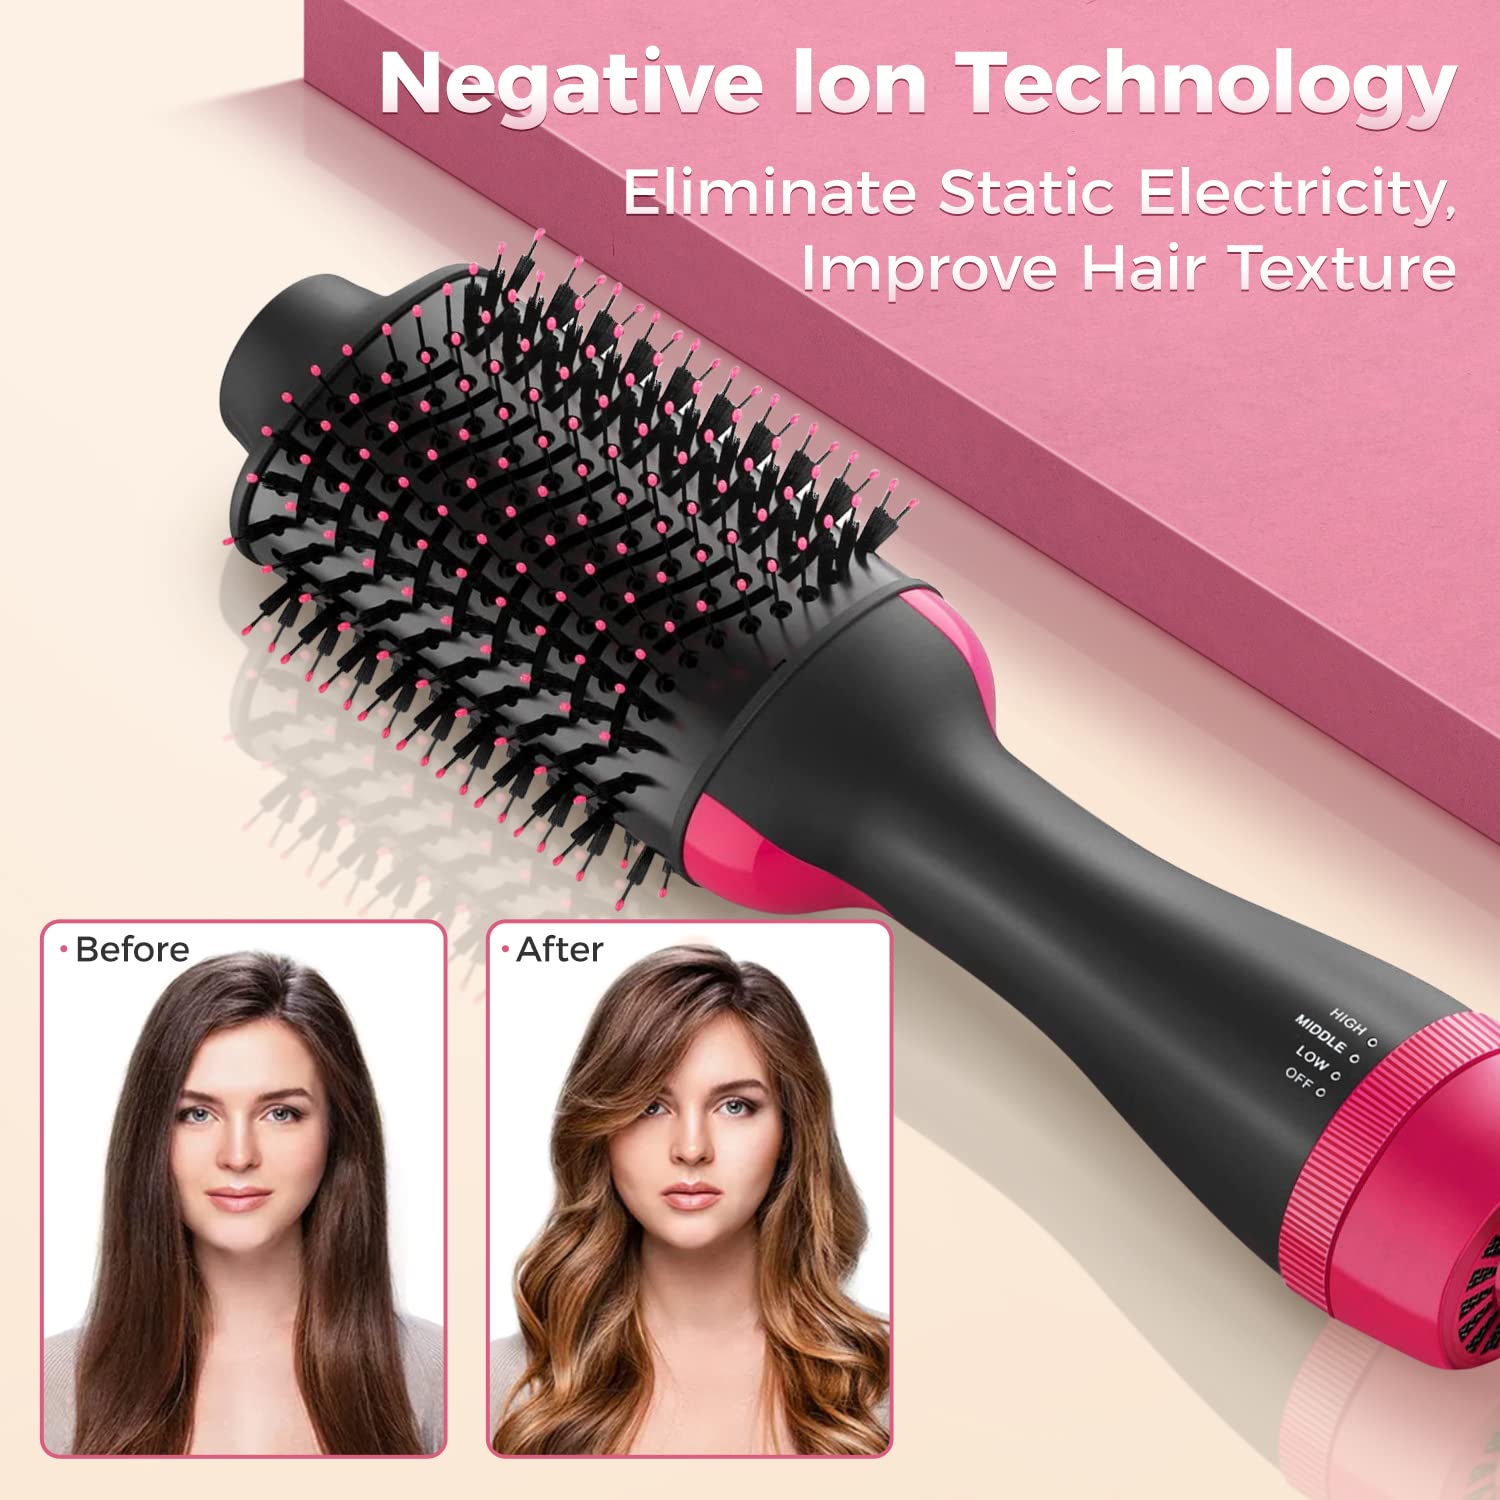 Nurifi Hair Dryer Brush Blow Dryer Brush in One, Hair Dryer and Styler Volumizer, 4 in 1 Hot Air Brush for Straightening, Curling, Drying, Salon, One Step Styling Tools (Pink)